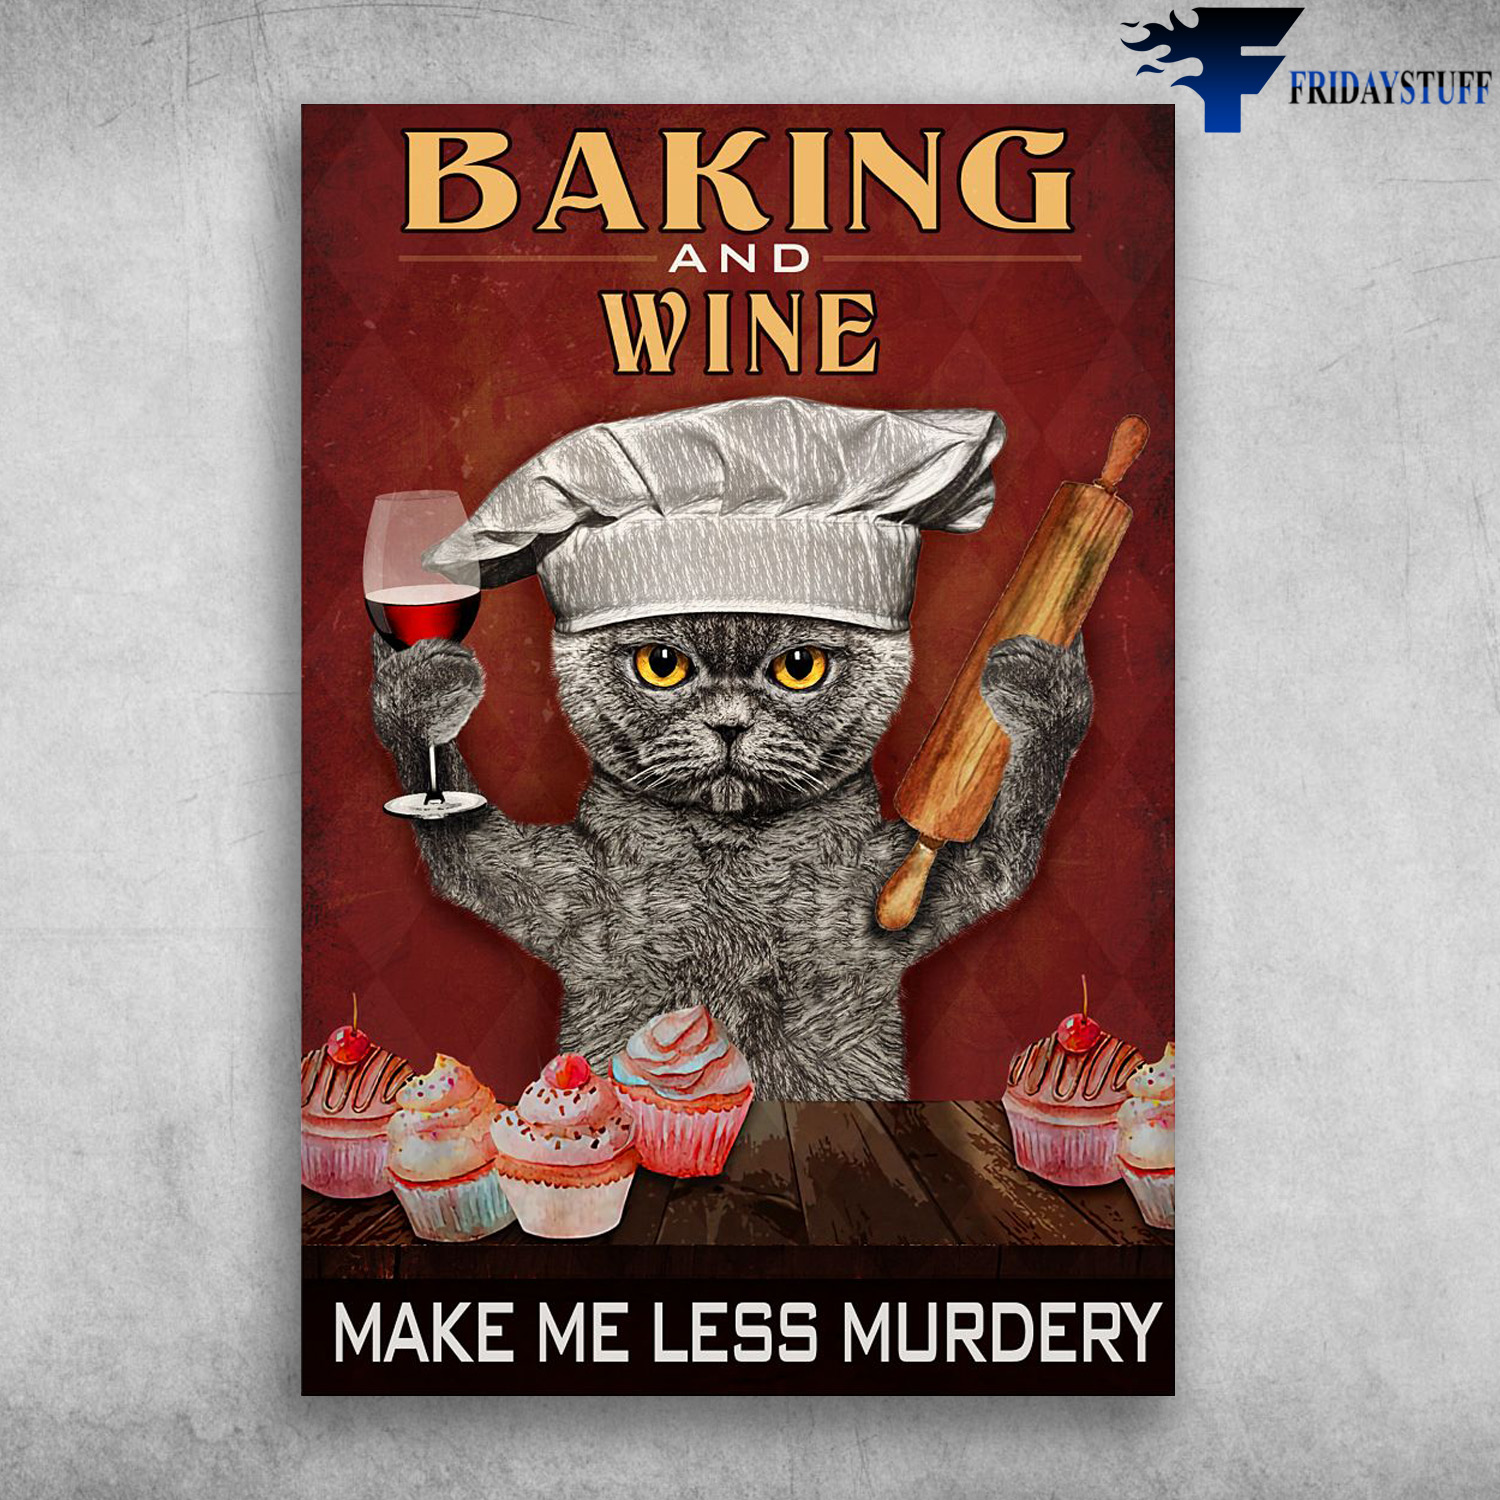 Baking Cat And Wine - Baking And Wine, Make Me Less Murdery